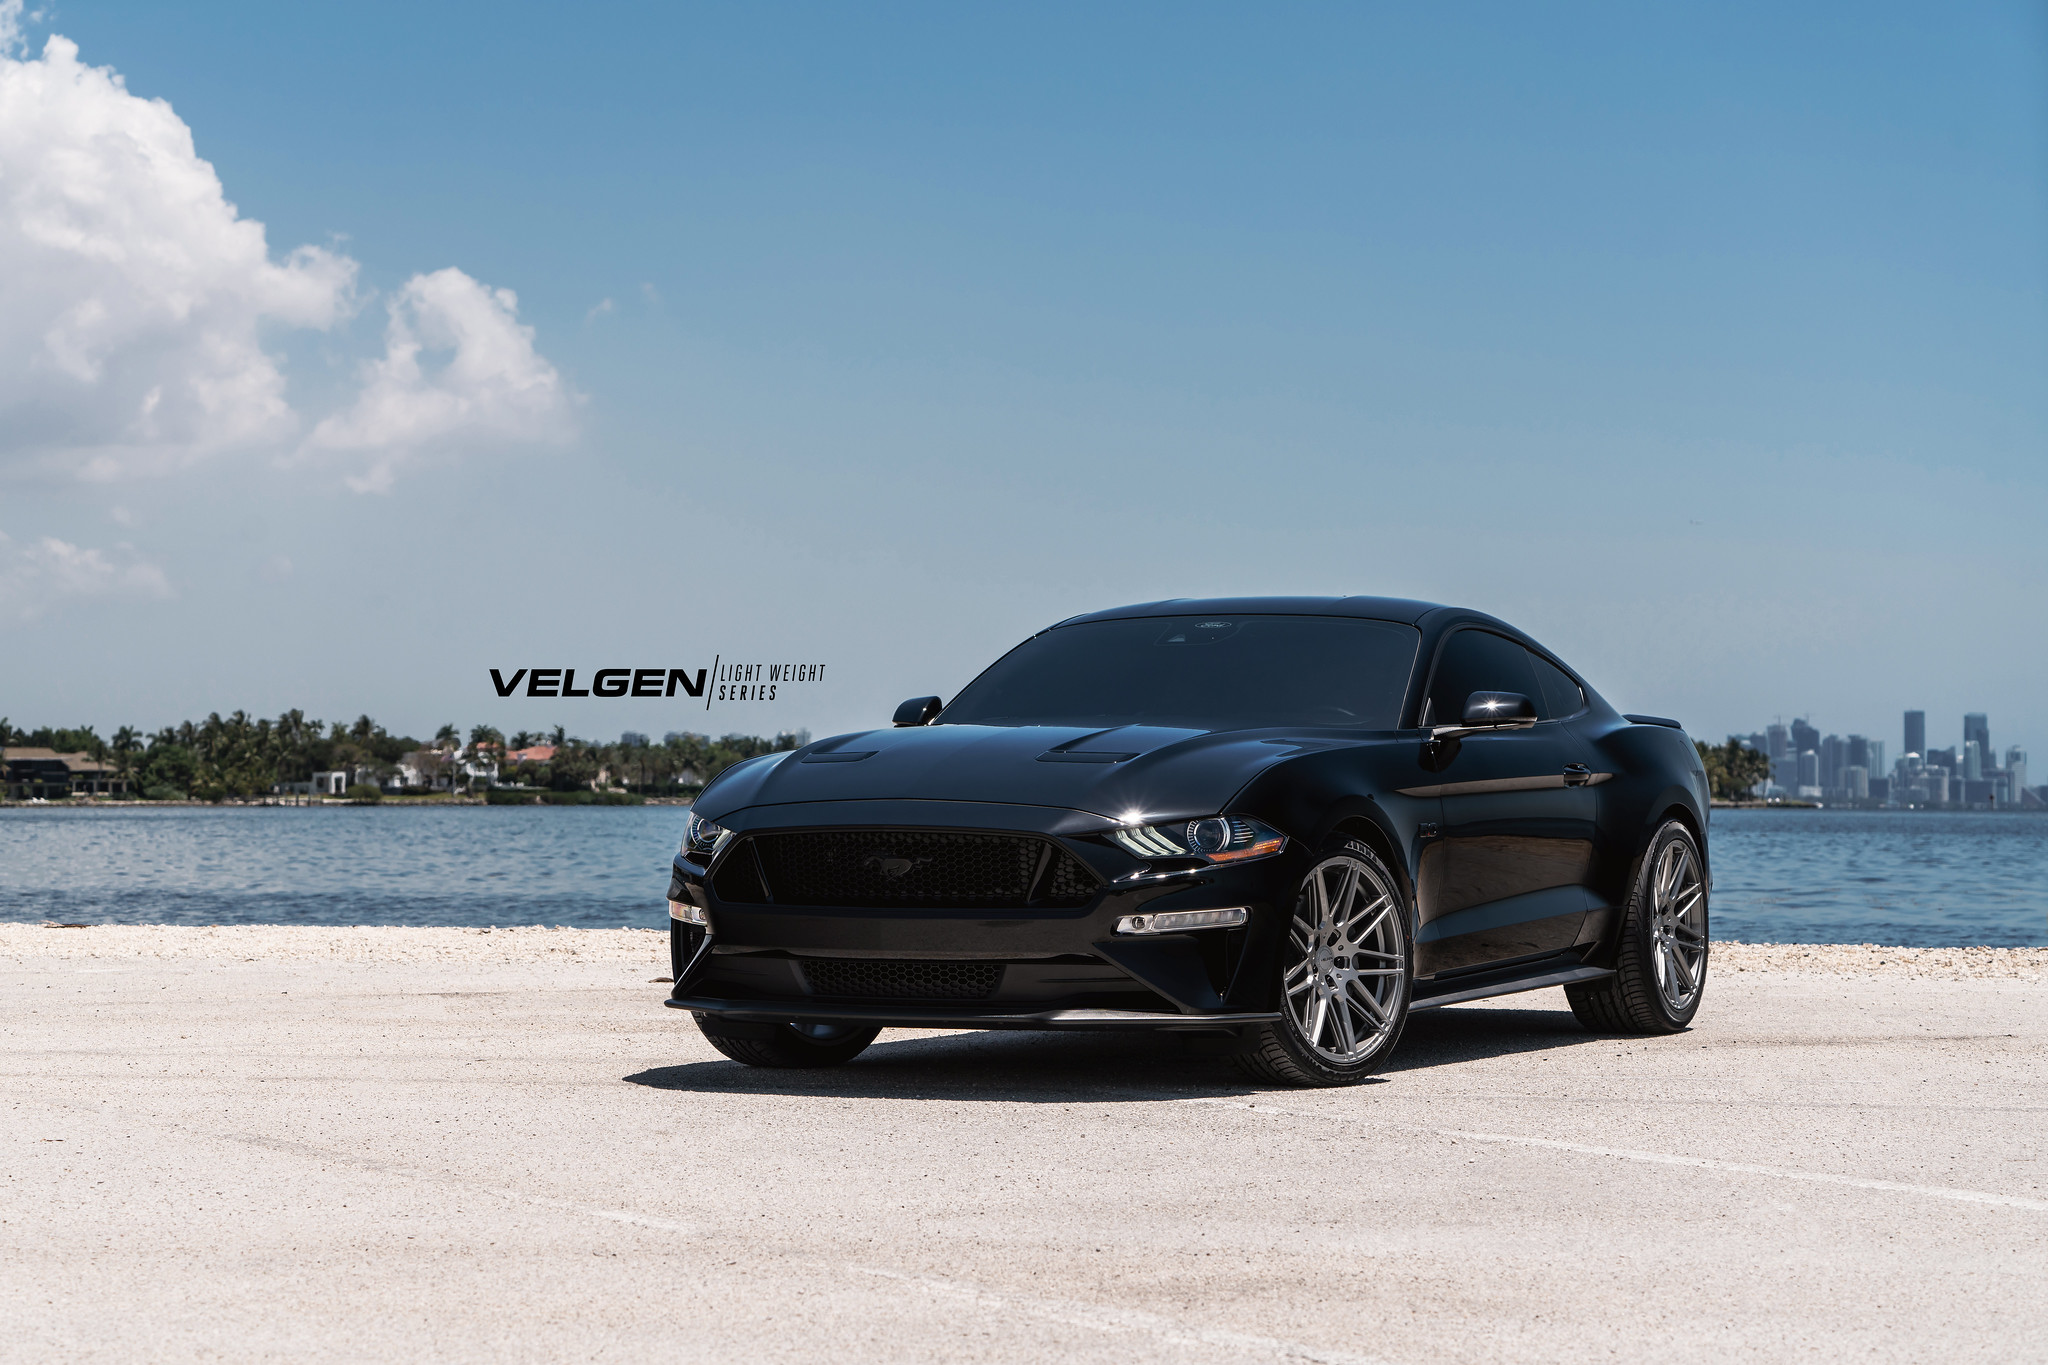 S650 Mustang Velgen wheels for your S650 Mustang | Vibe Motorsports 52064680918_2e9a337a87_k